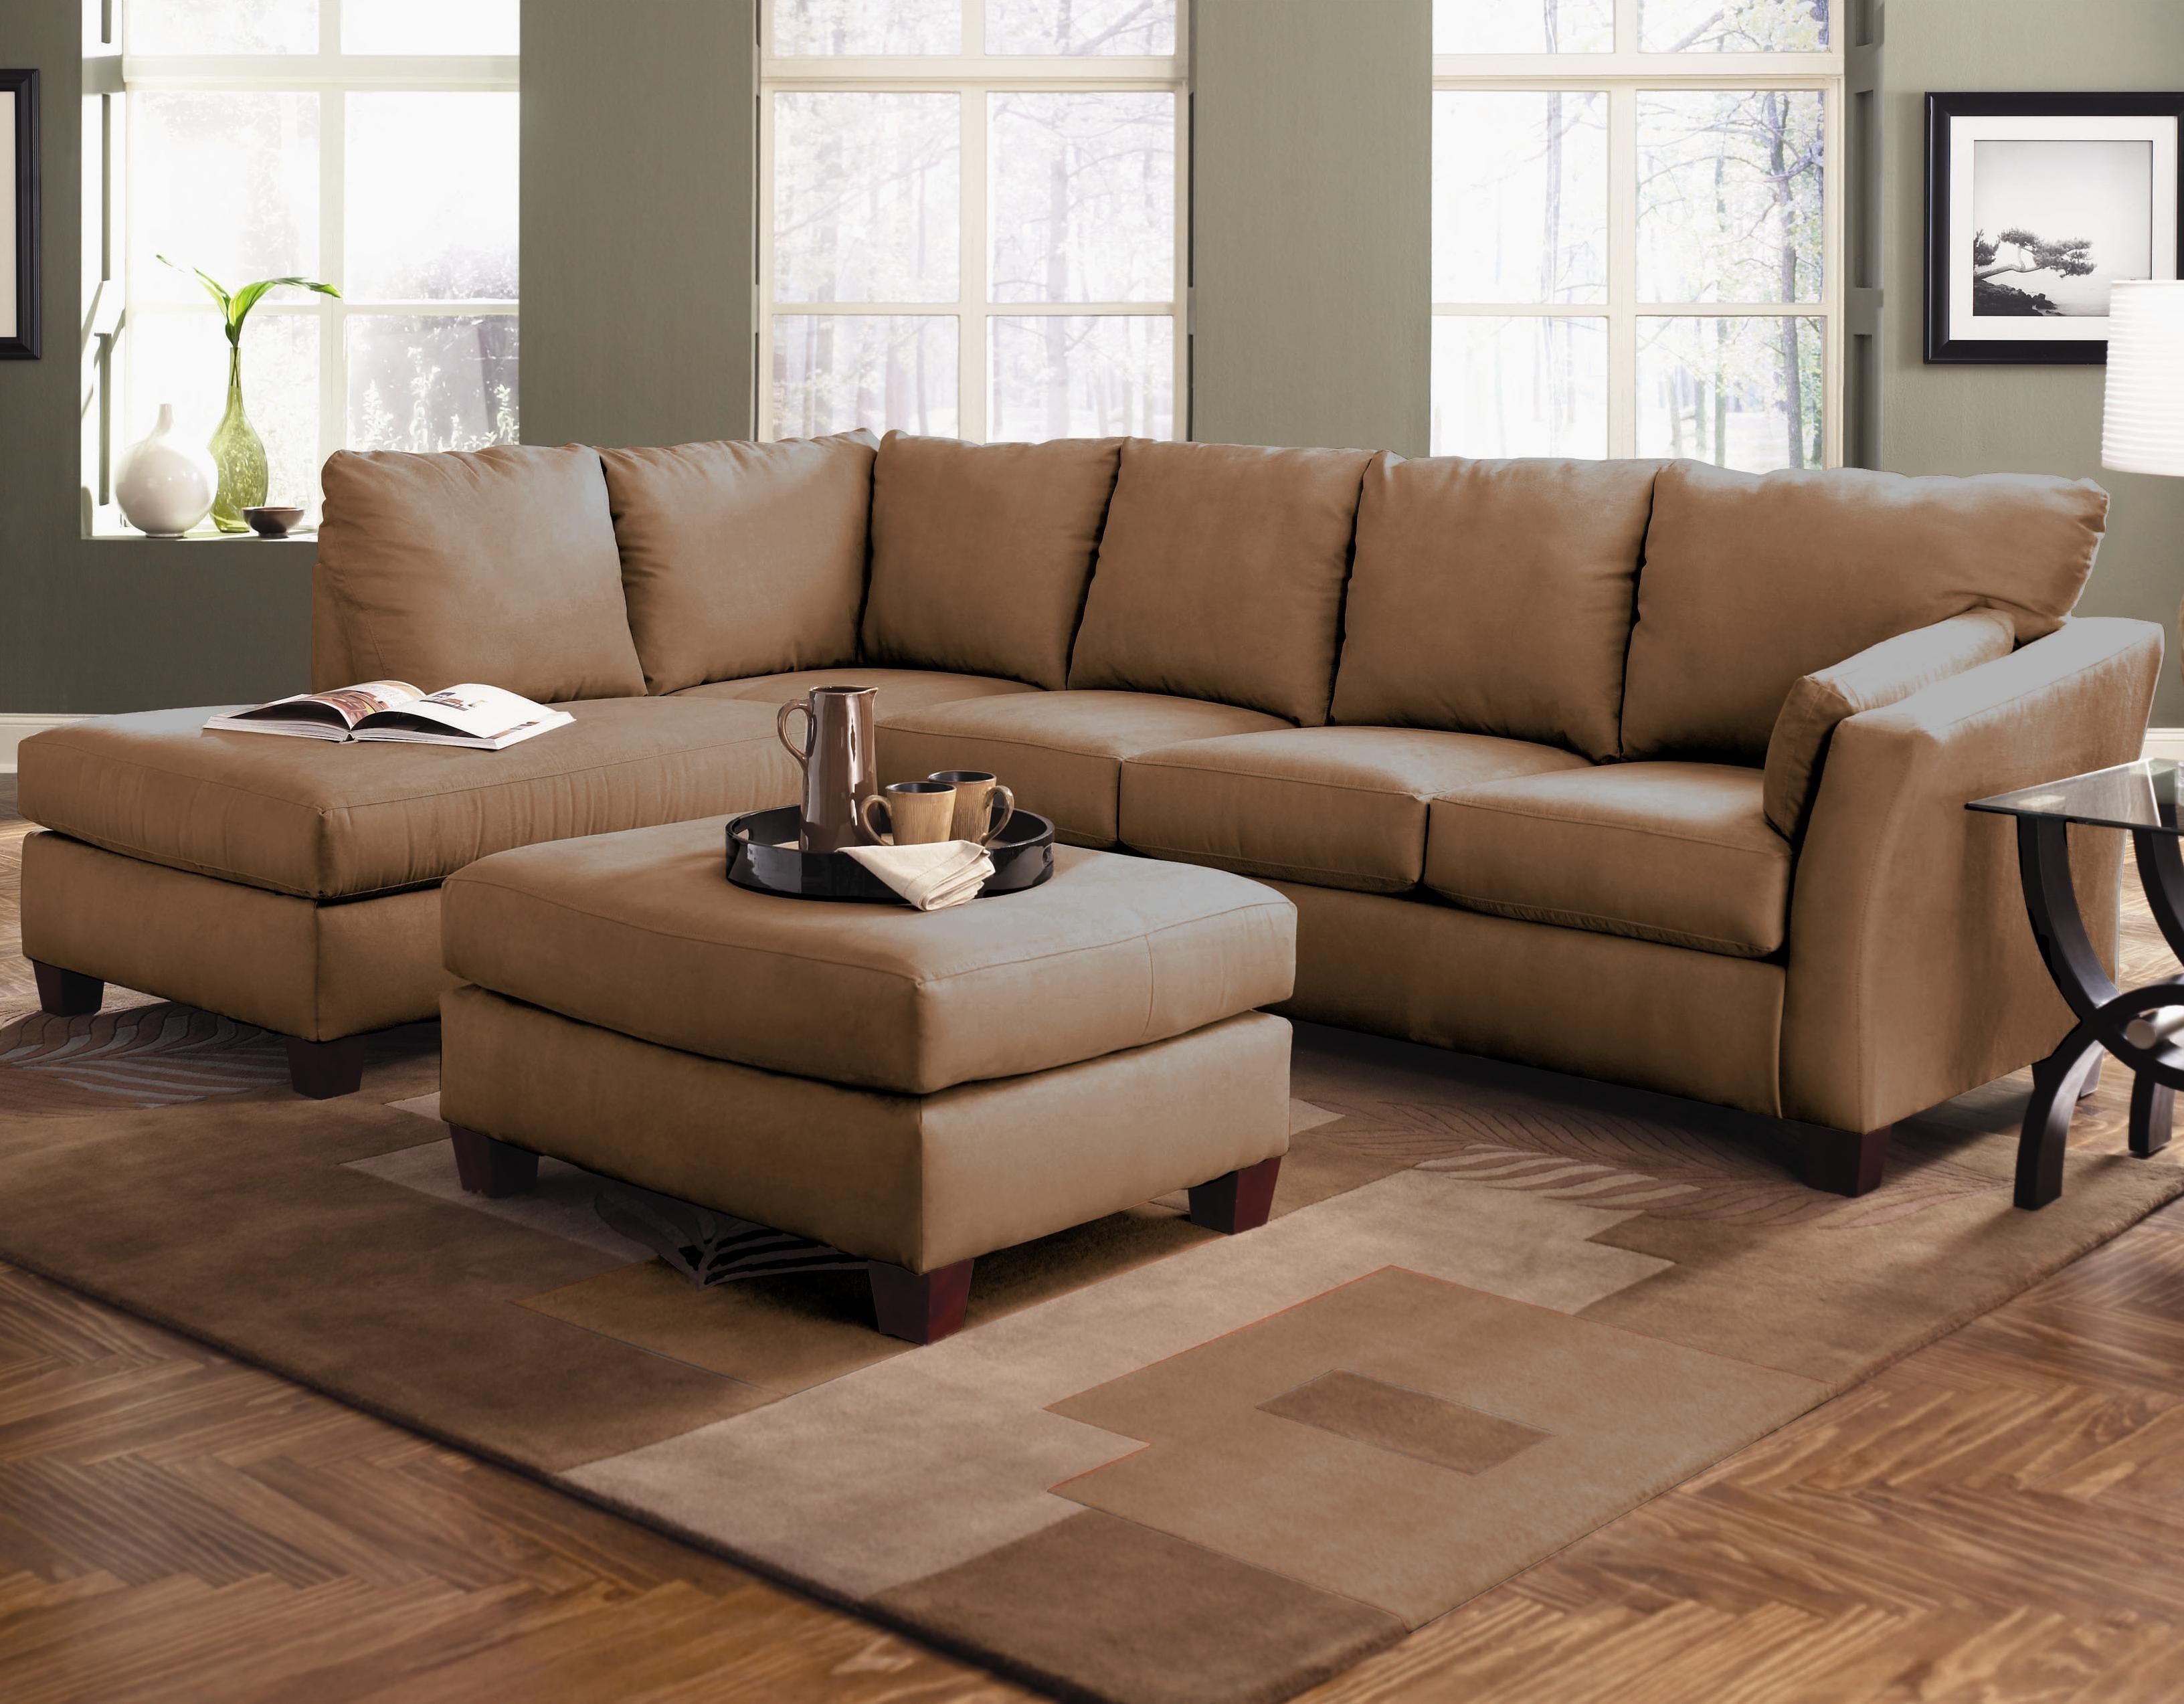 Value City Sectional Sofa Within Sofas Furniture Sectionals Plan 14 Throughout Value City Sectional Sofas (View 5 of 10)